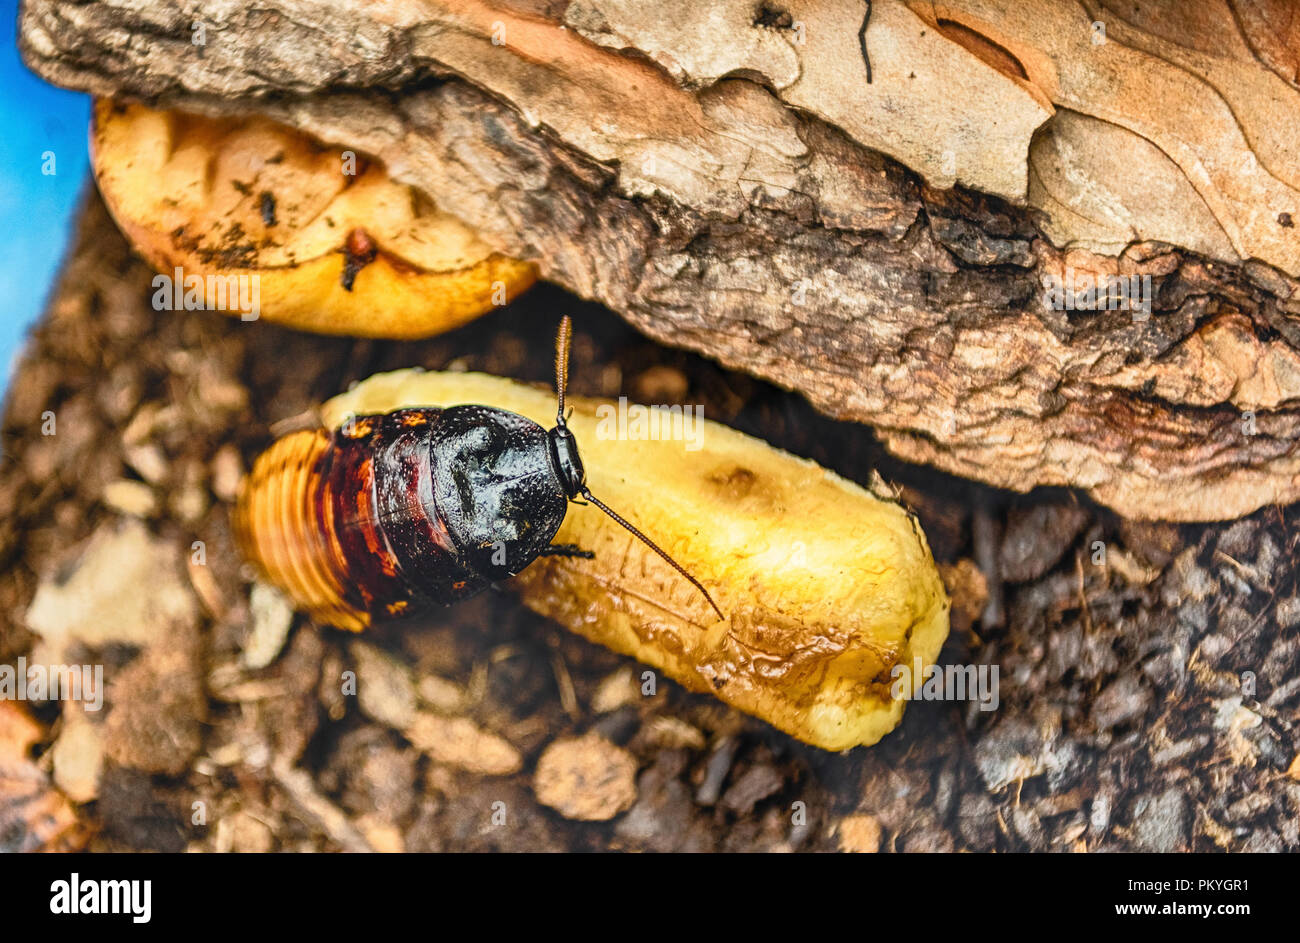 Madagascar hissing cockroach aka Gromphadorina Portentosa while eating a banana. It is one of the largest species of cockroach Stock Photo